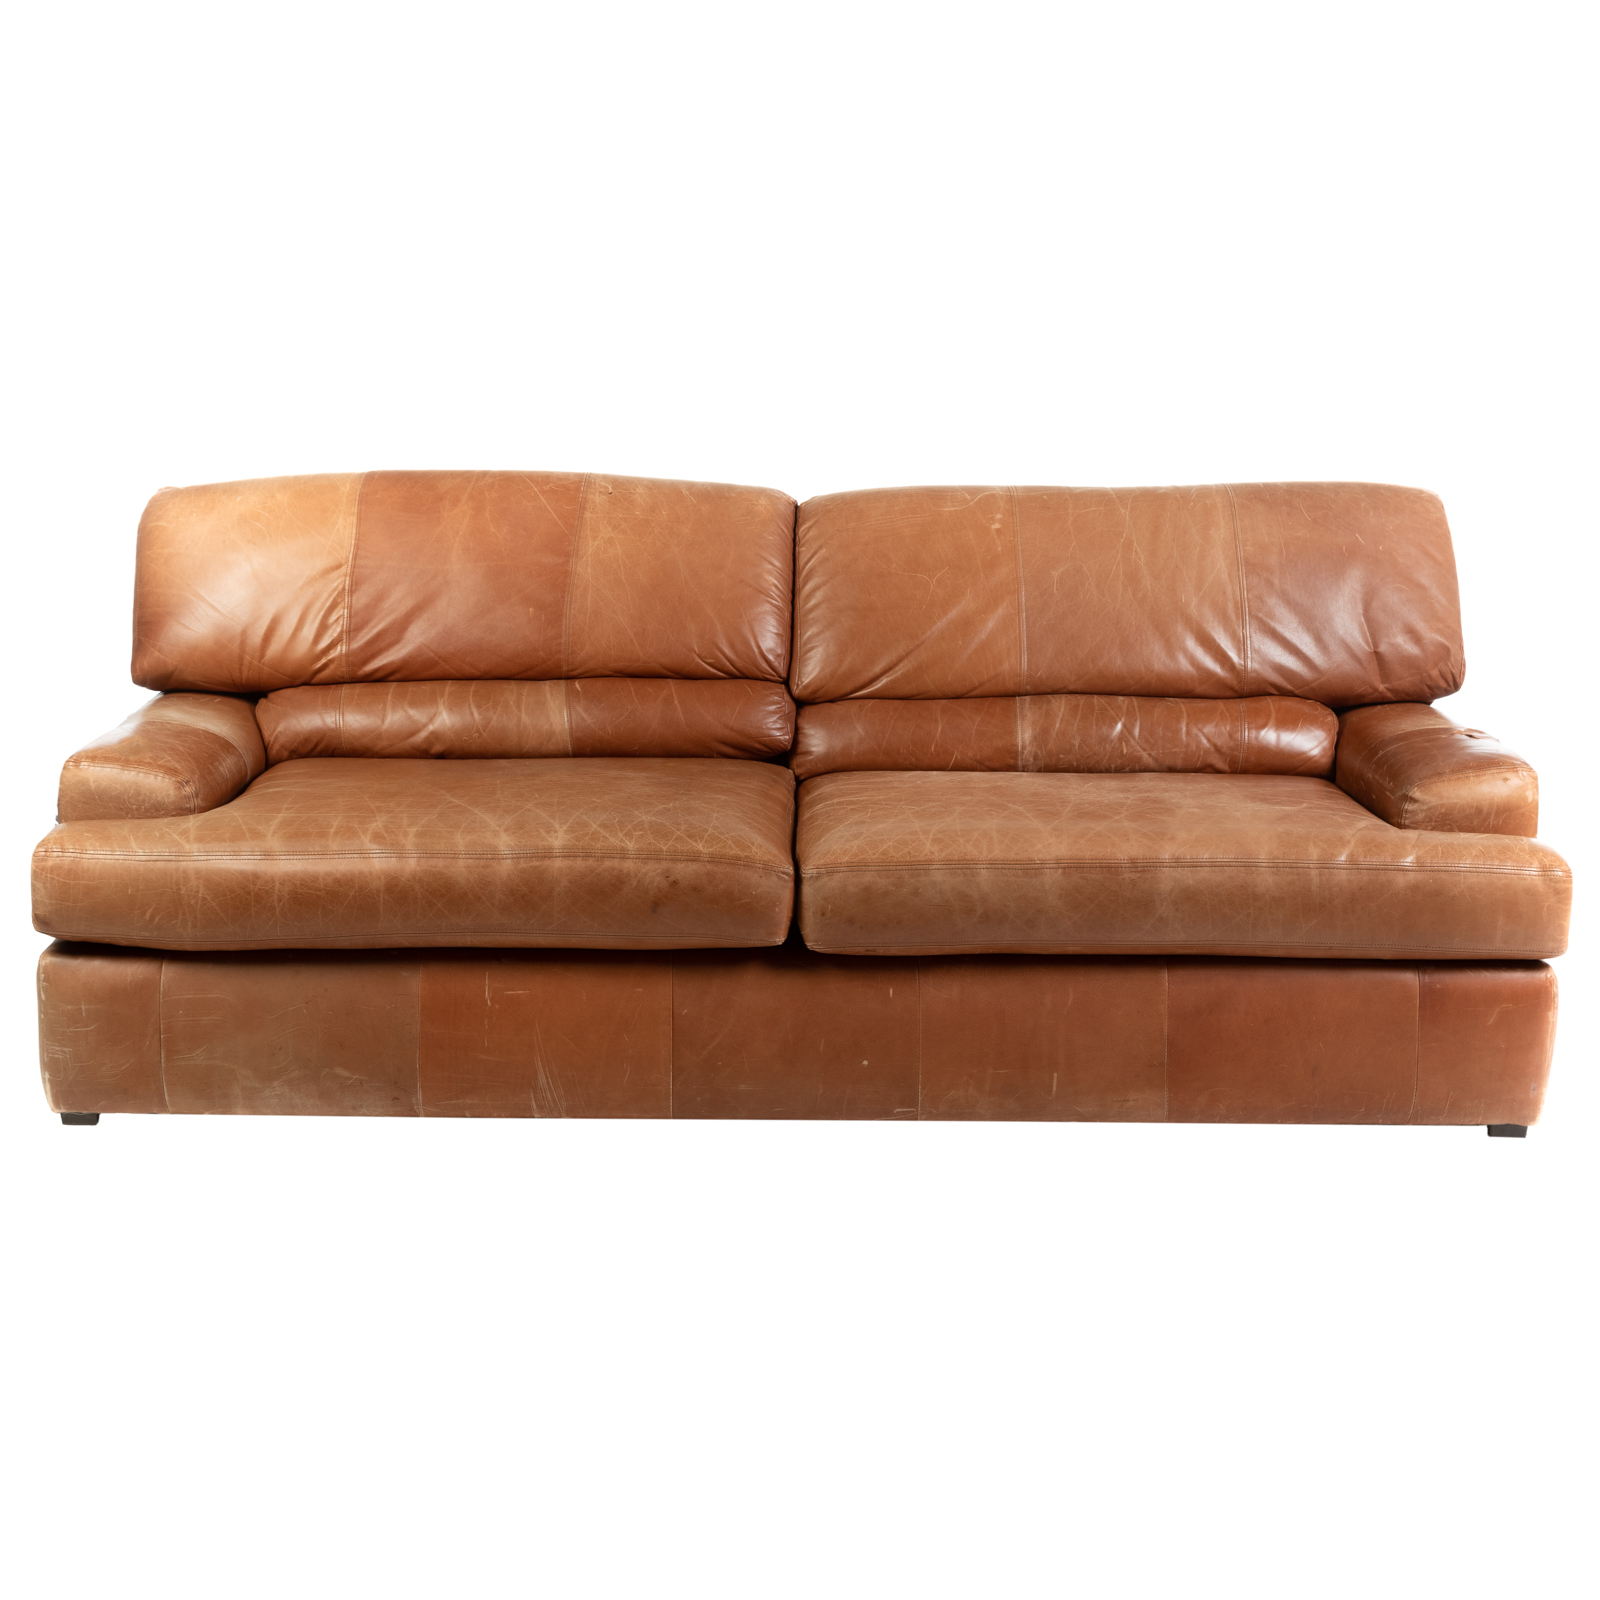 CONTEMPORARY LEATHER TWO CUSHION 36a996